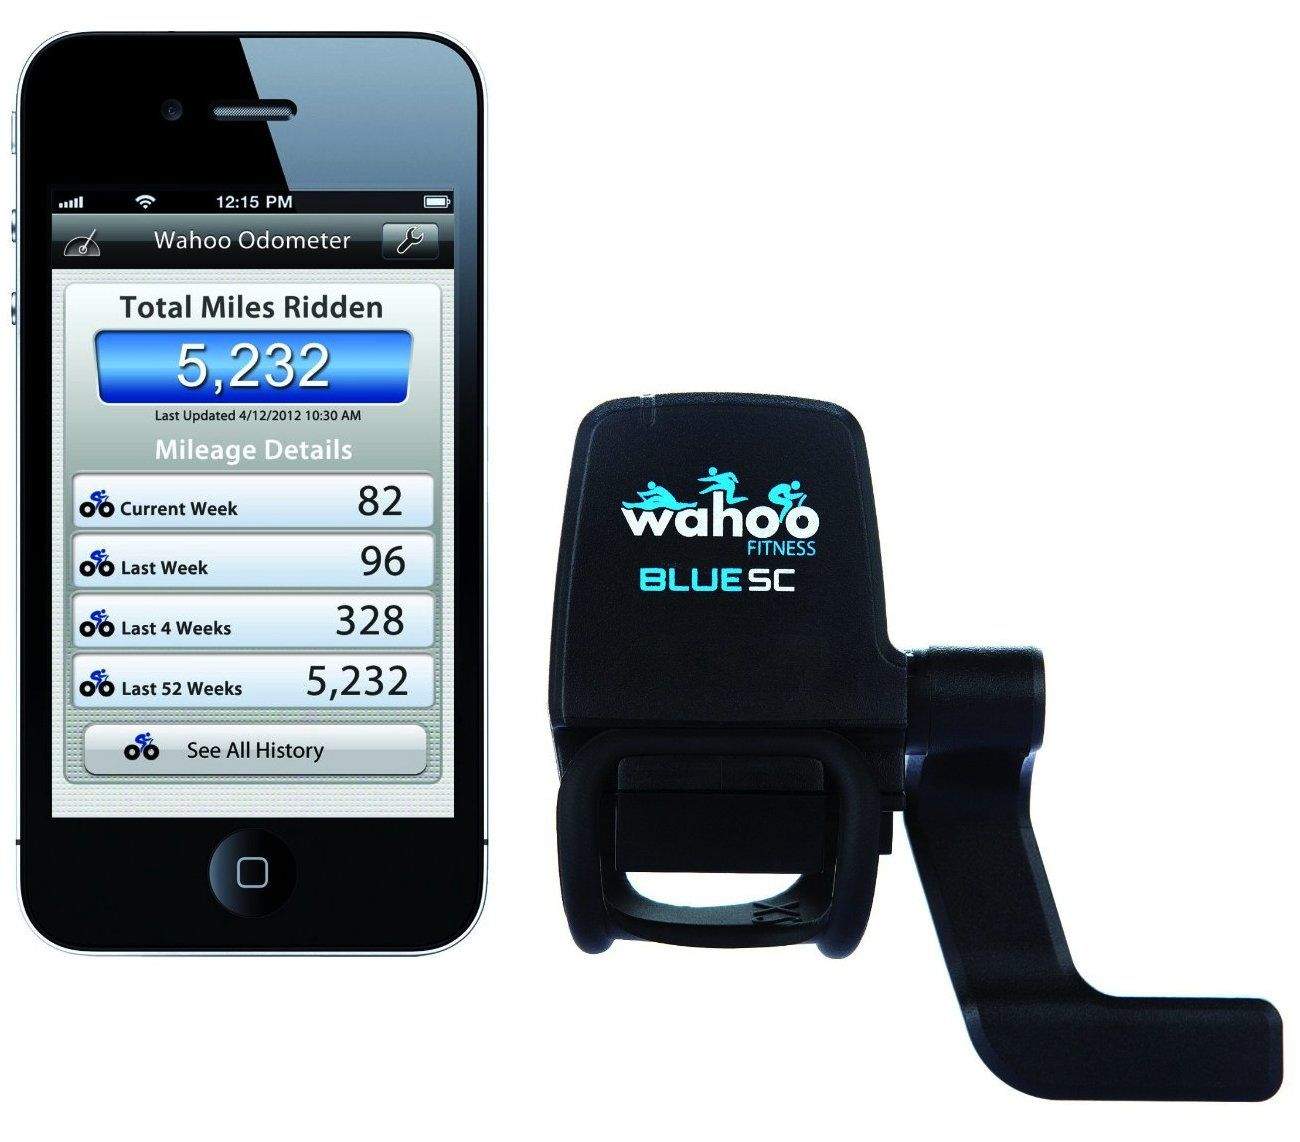 A lot of wearable wrist band fitness trackers aren’t great at measuring cycling compared to running, so if you’re putting together a regimen based on exercise that is easy to quantify, you may be tempted to put your bike away. Not so fast! The Wahoo Blue SC attaches to your bicycle and then works with your favorite cycling app to track your cycling speed, cadence, and distance on your iPhone while you ride. Even better, its internal odometer can break down the lifetime mileage ridden on your bike by week, month and even year. So get peddling.